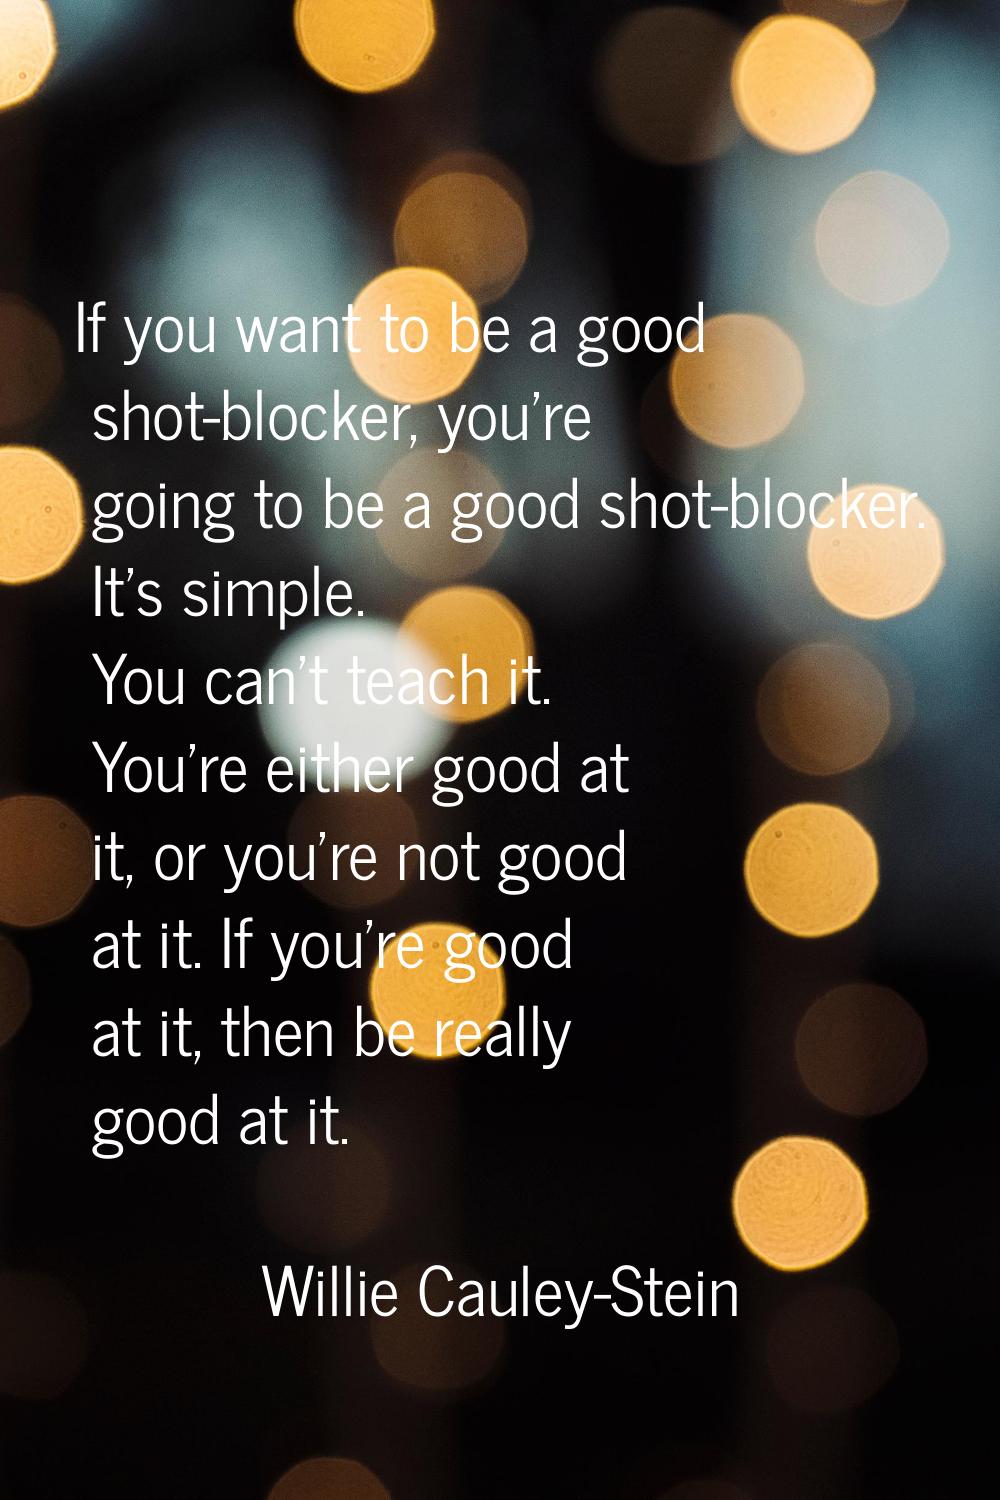 If you want to be a good shot-blocker, you're going to be a good shot-blocker. It's simple. You can